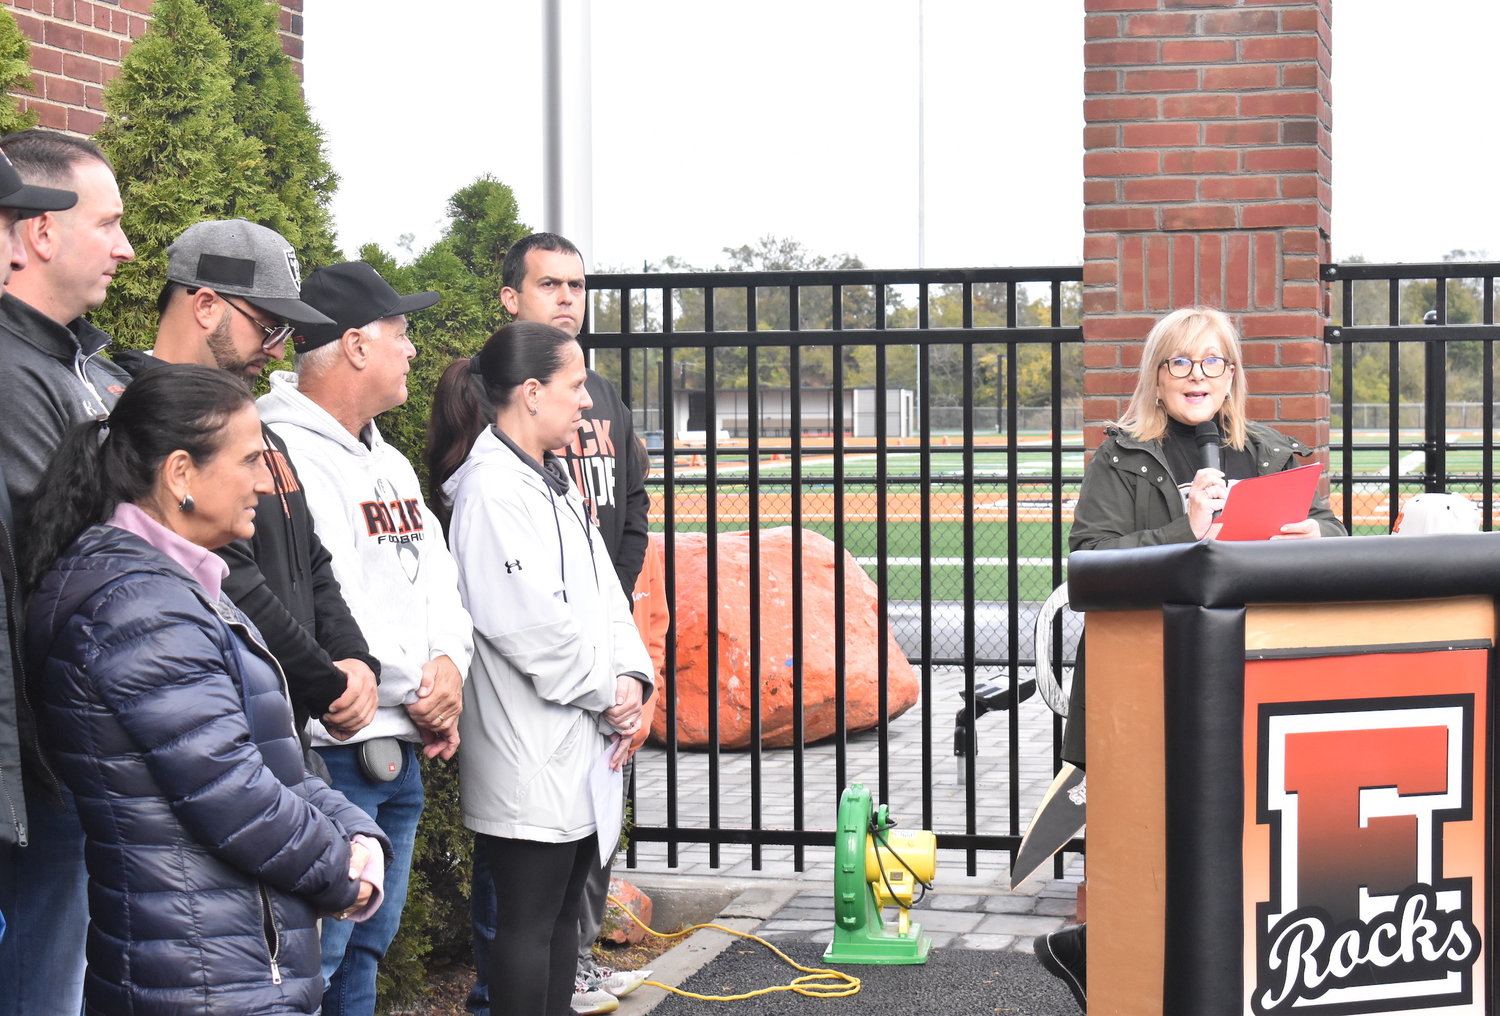 Superintendent Lisa Ruiz thanked everyone who helped prepare the field for the team’s last game of the season.